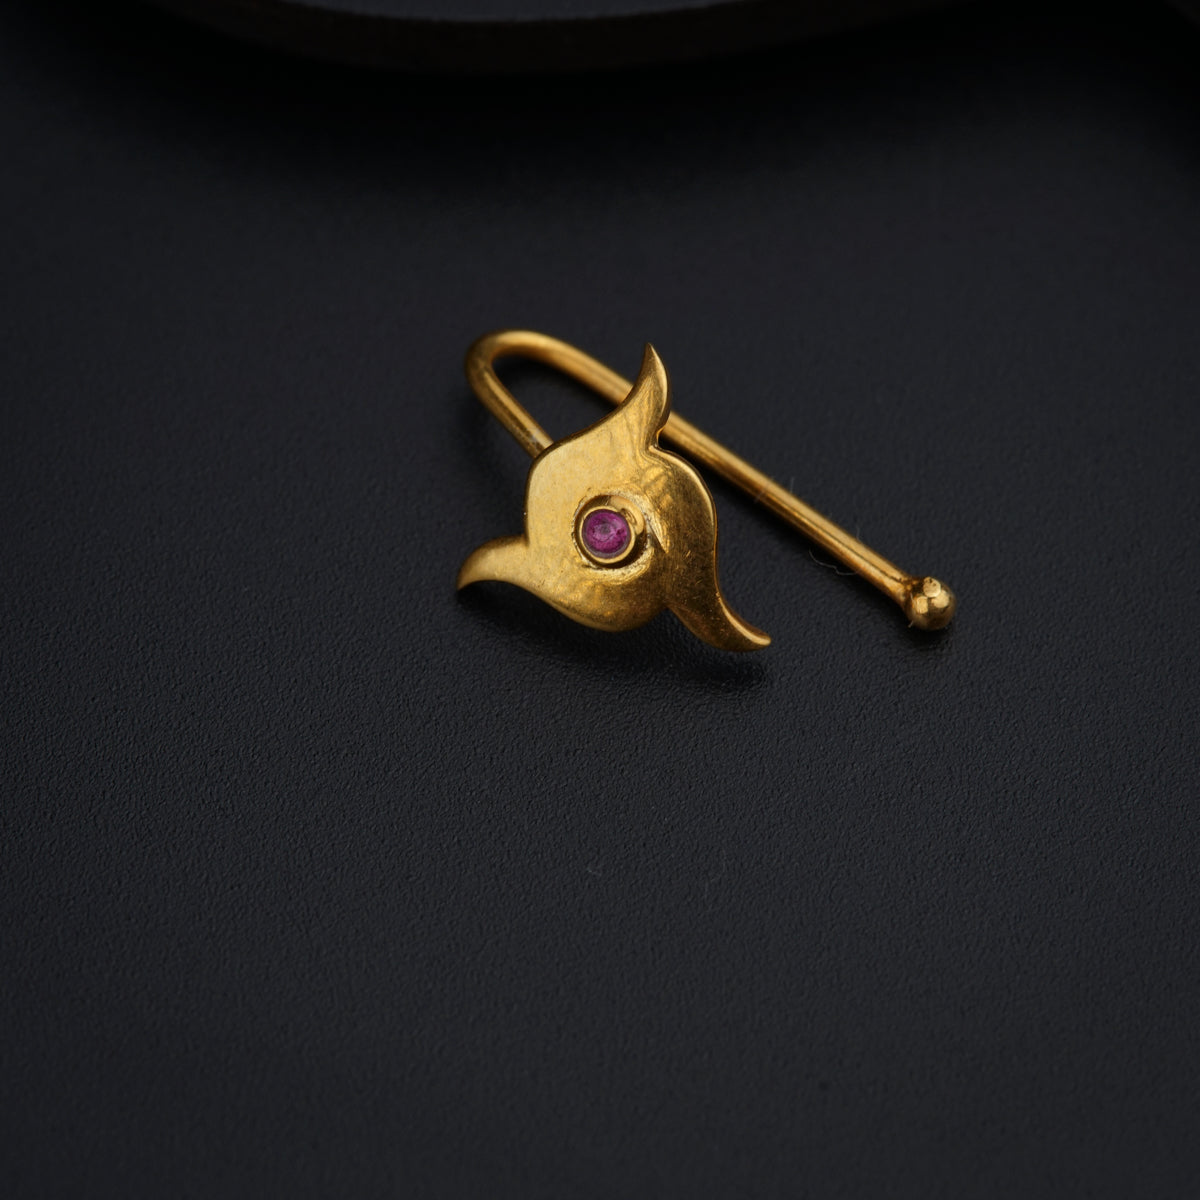 a gold brooch with a pink stone in the center